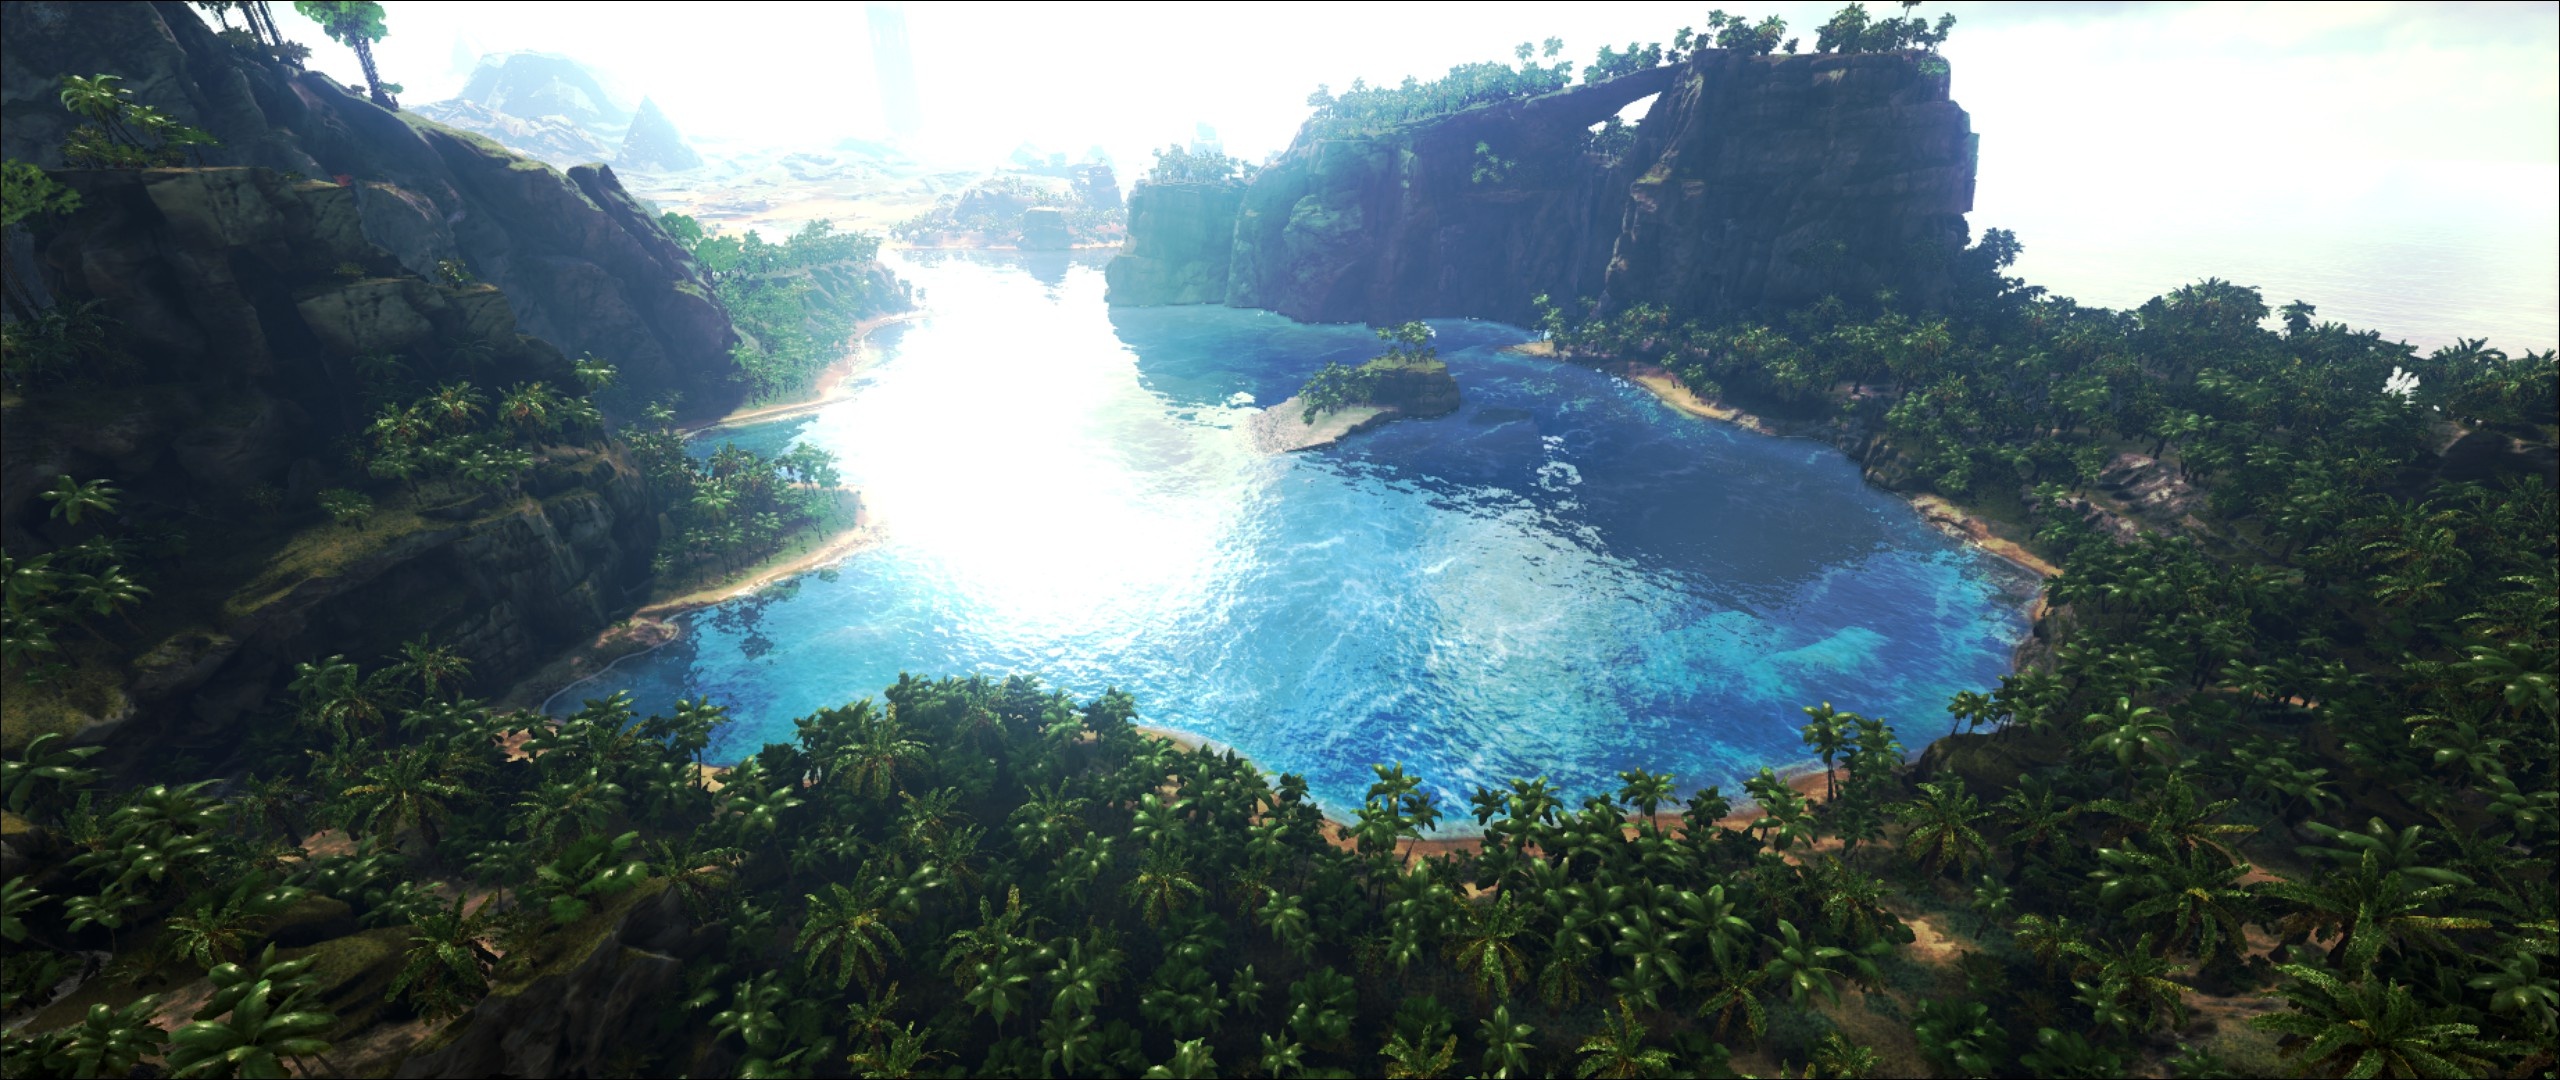 ARK: Survival Evolved: Studio Wildcard co-opted Instinct Games to facilitate development. 2560x1080 Dual Screen Wallpaper.